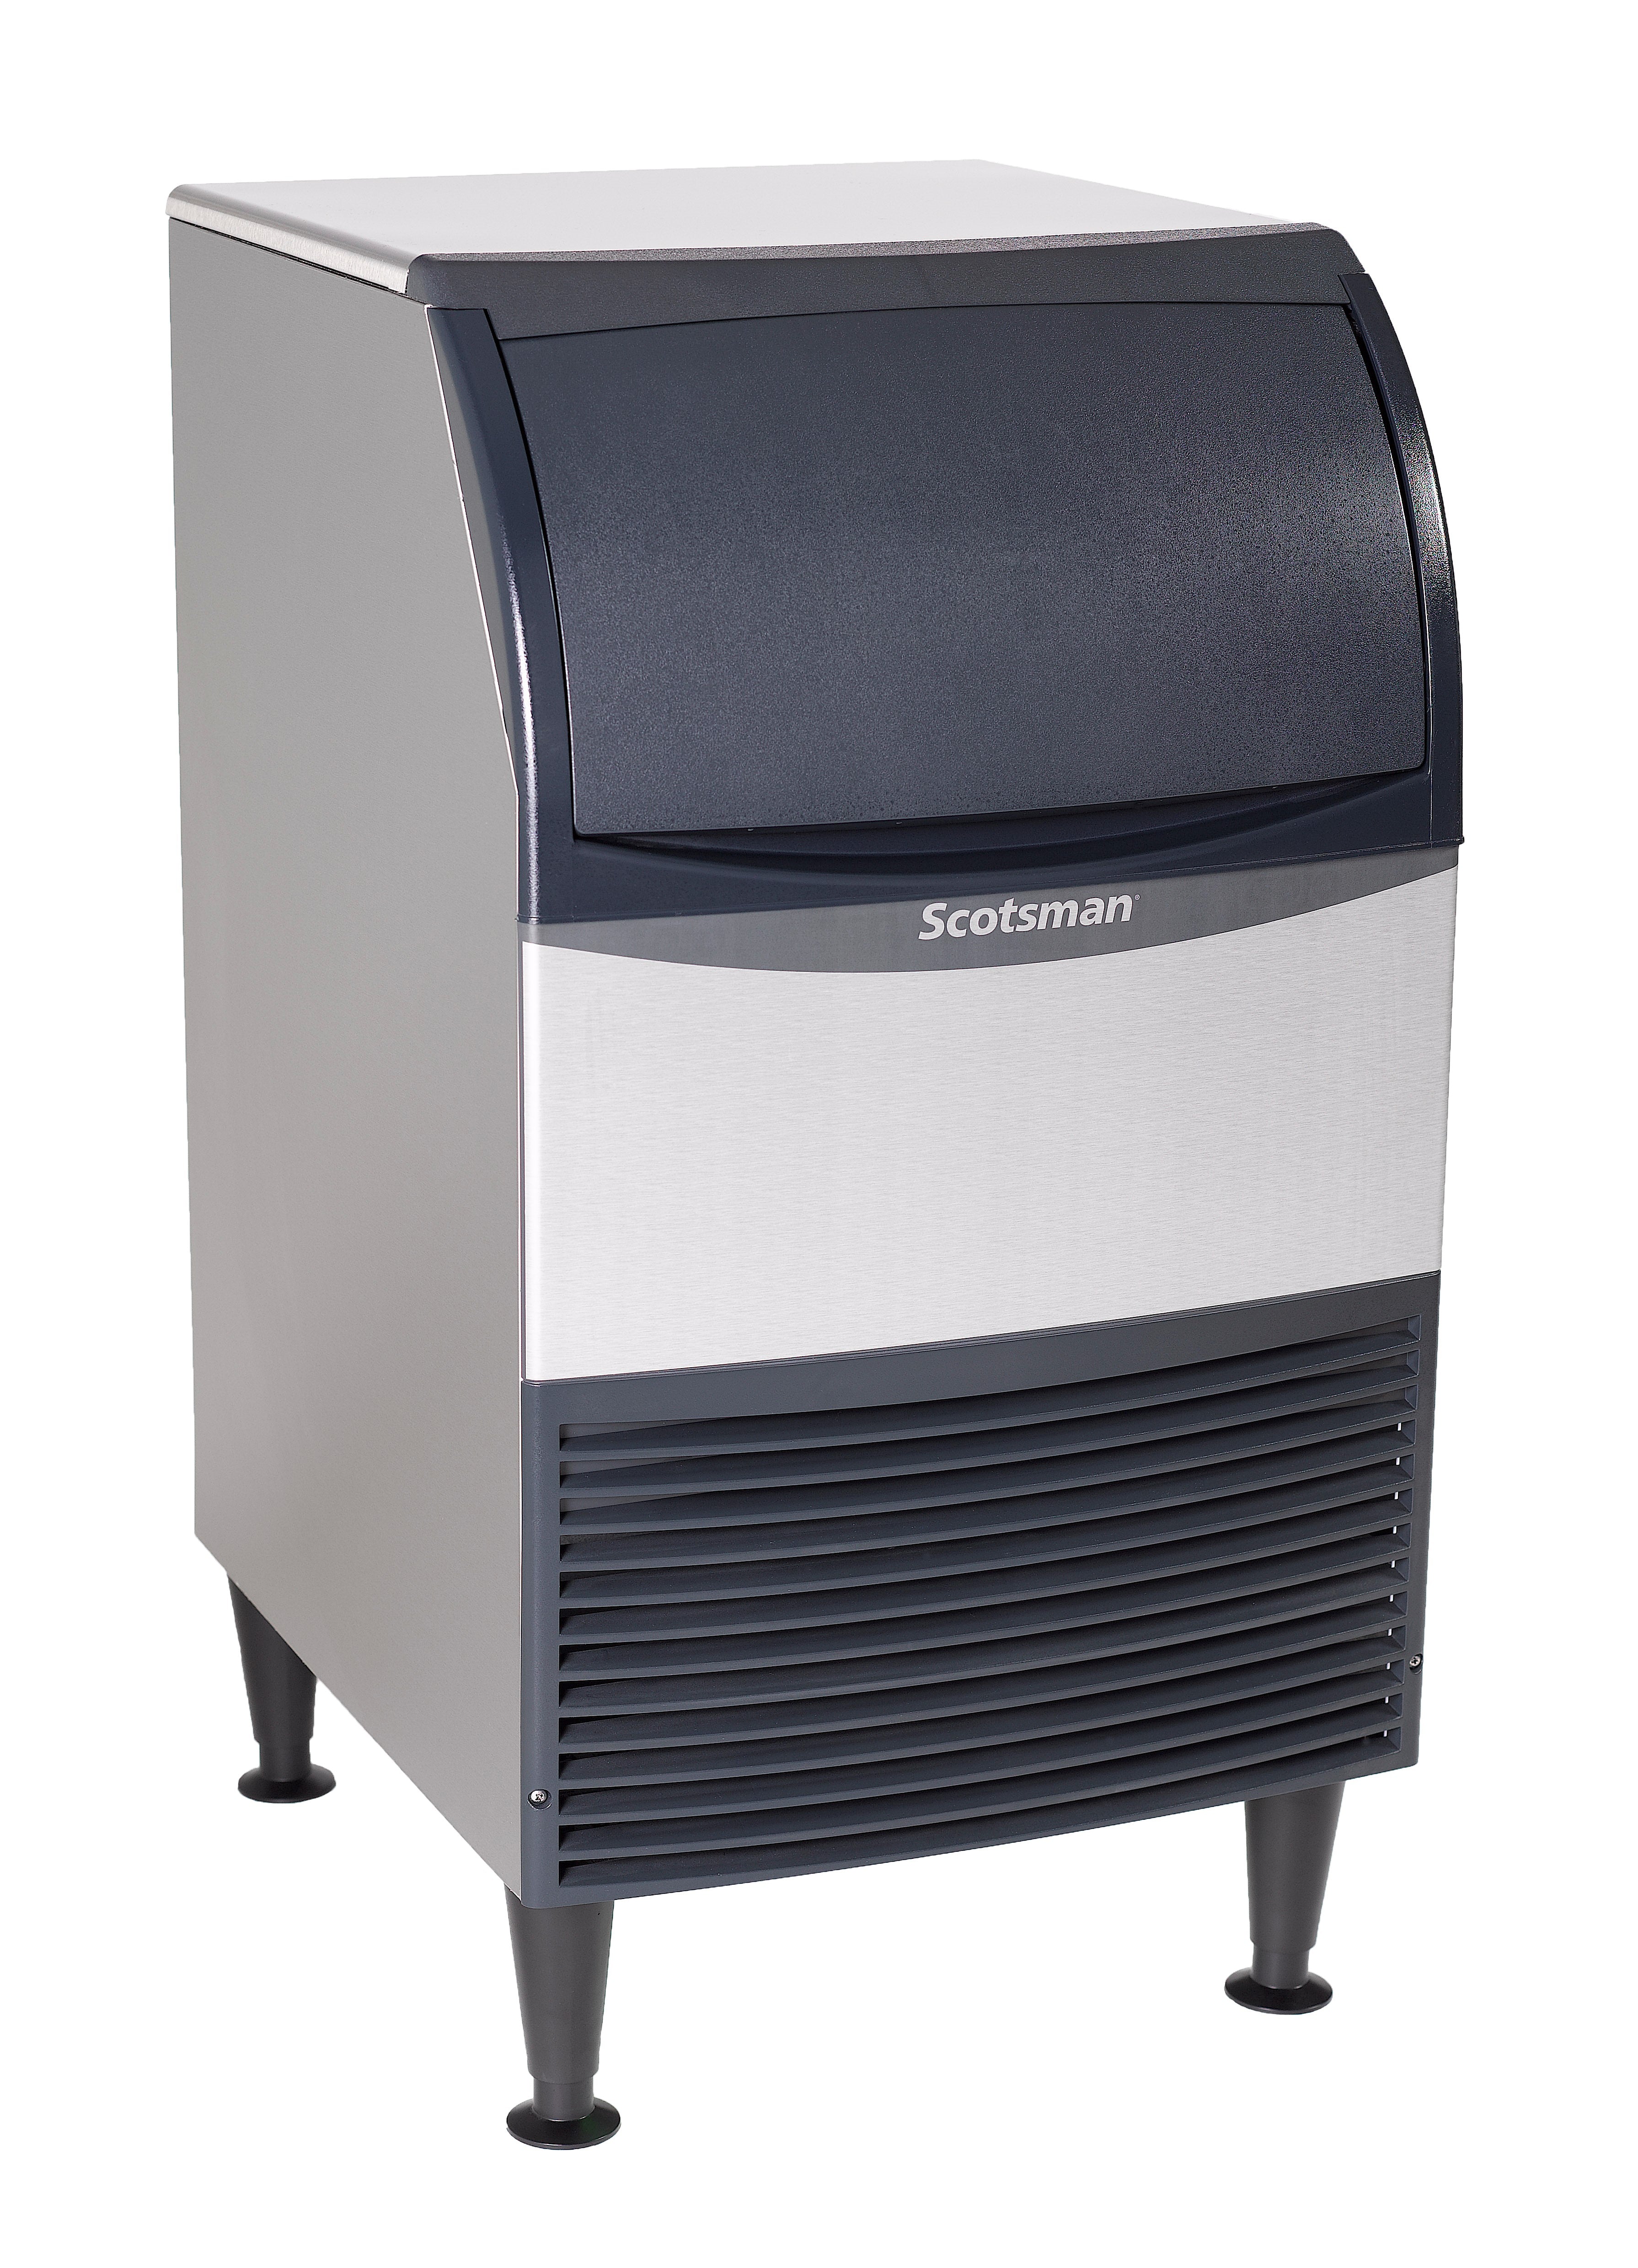 Scotsman UF2020A-1 Air Cooled Flake Ice Maker with Bin Produces up to 216 Pounds of Ice Per Hour